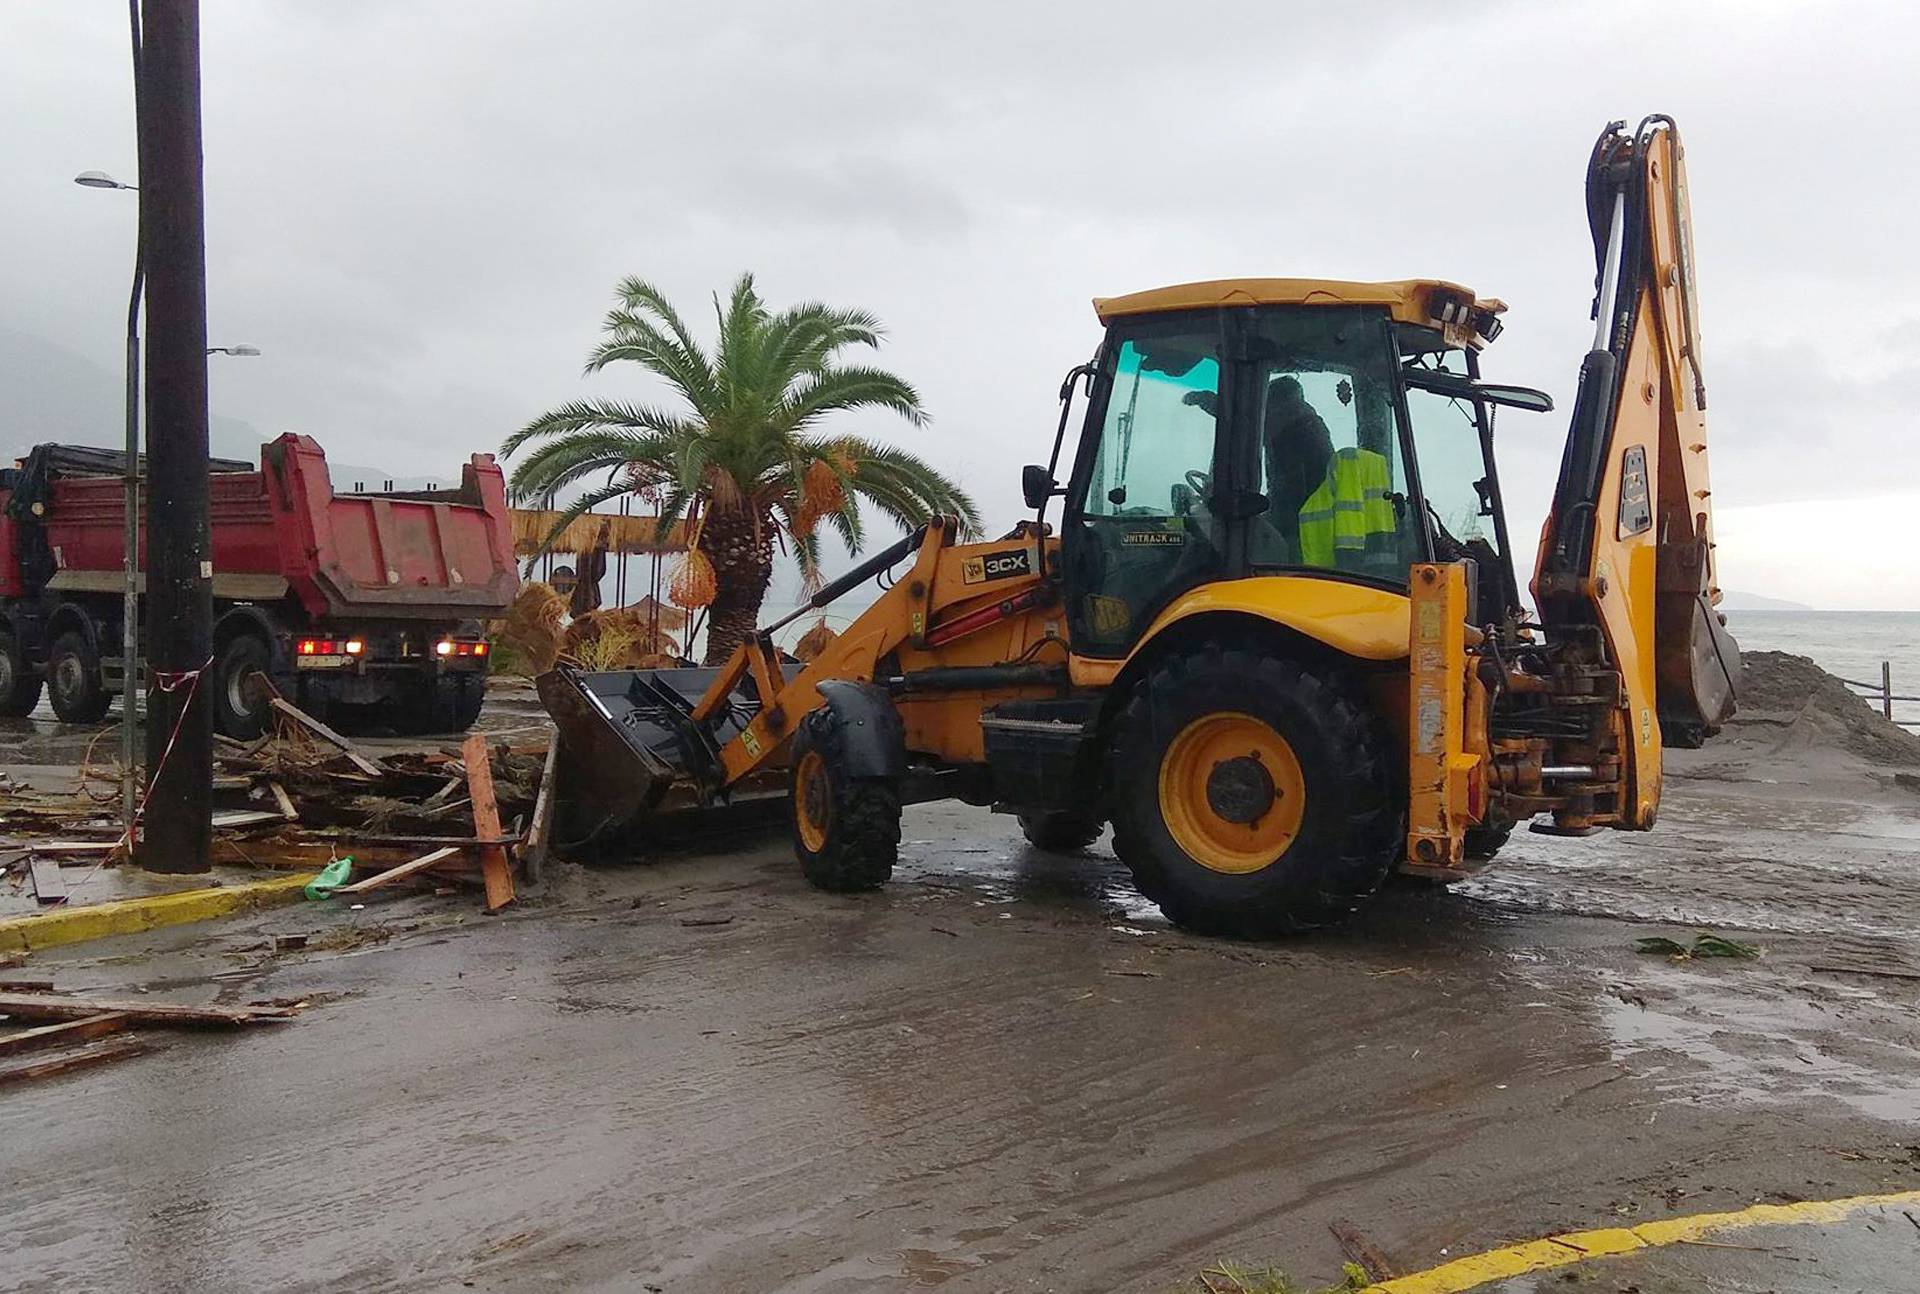 An excavator collects debris from the seaside following a cyclone in Kalamata